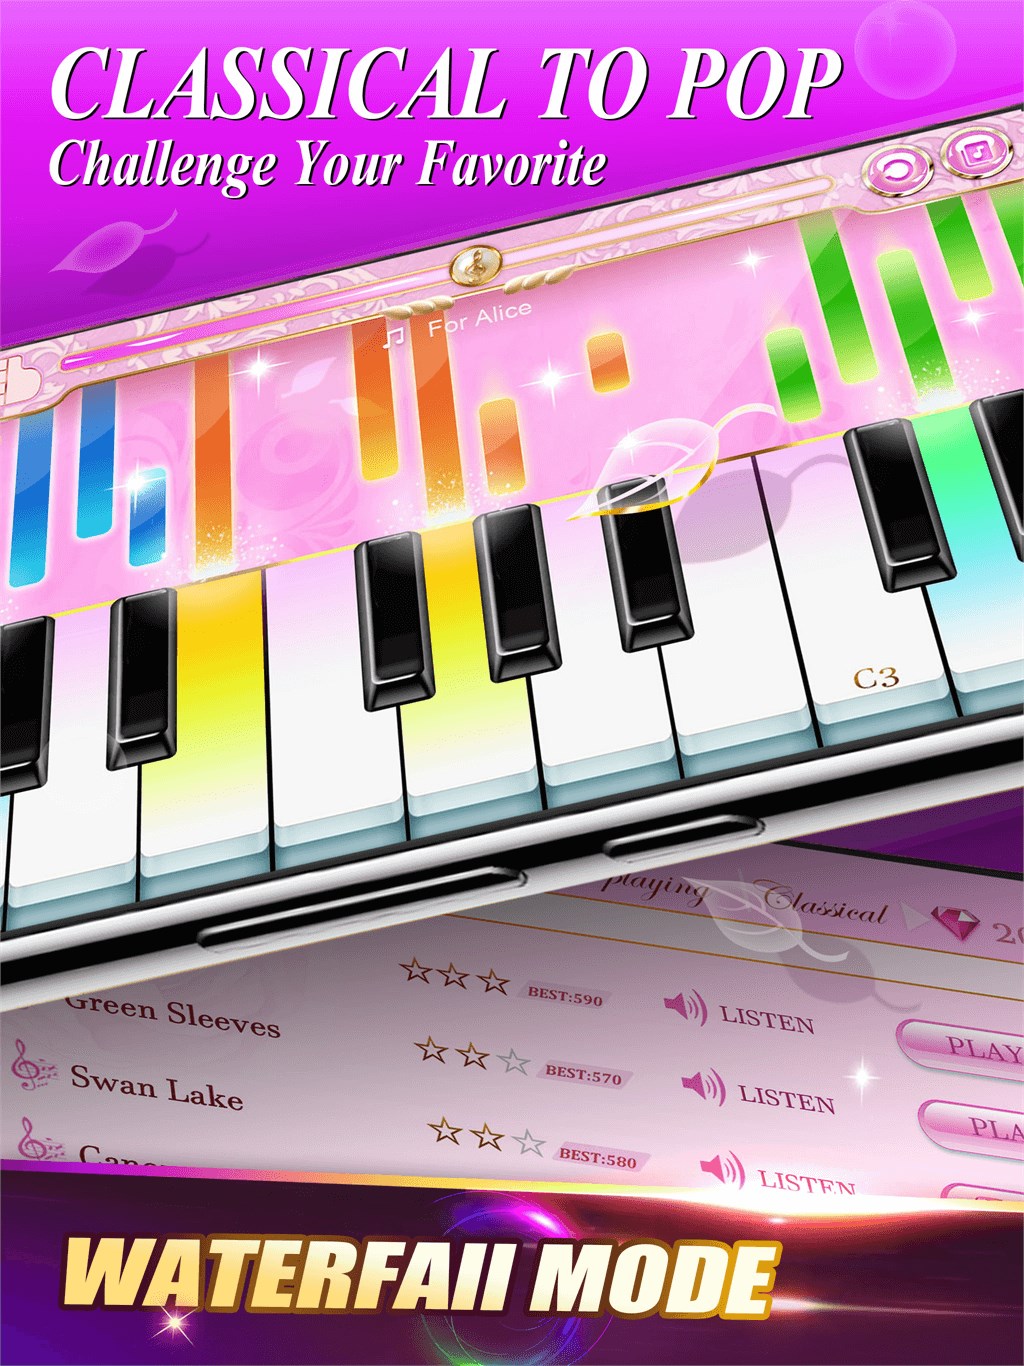 3D Piano Keyboard - Pink Piano Tiles, Music Game Apk Download for